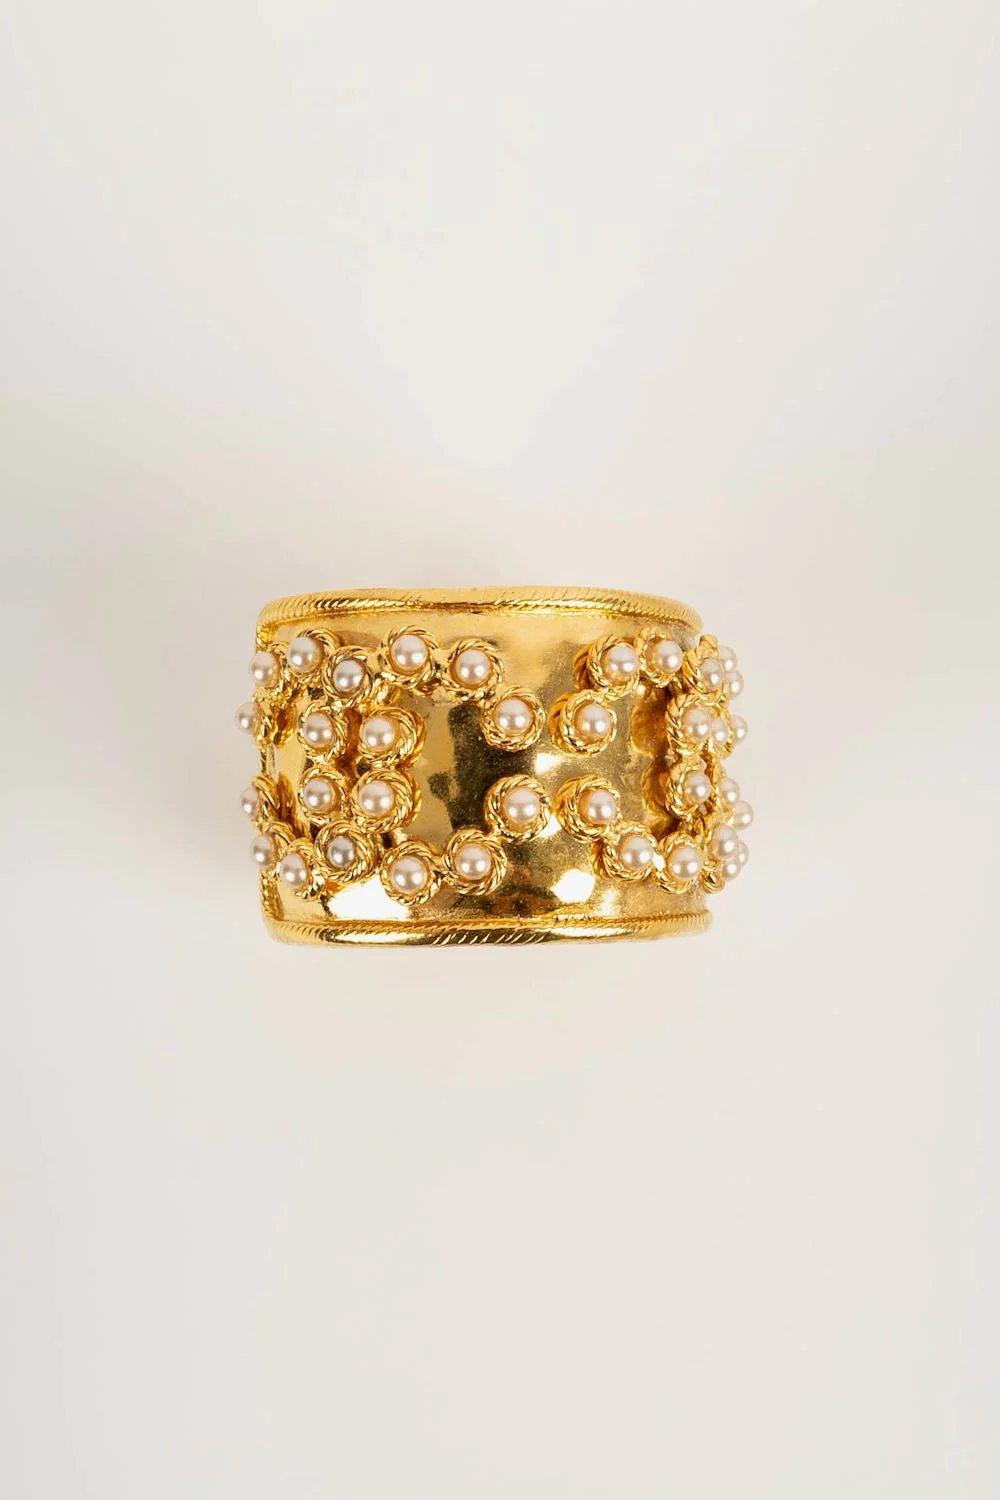 Chanel Cuff Bracelet in Gilded Metal and Cabochons For Sale 1